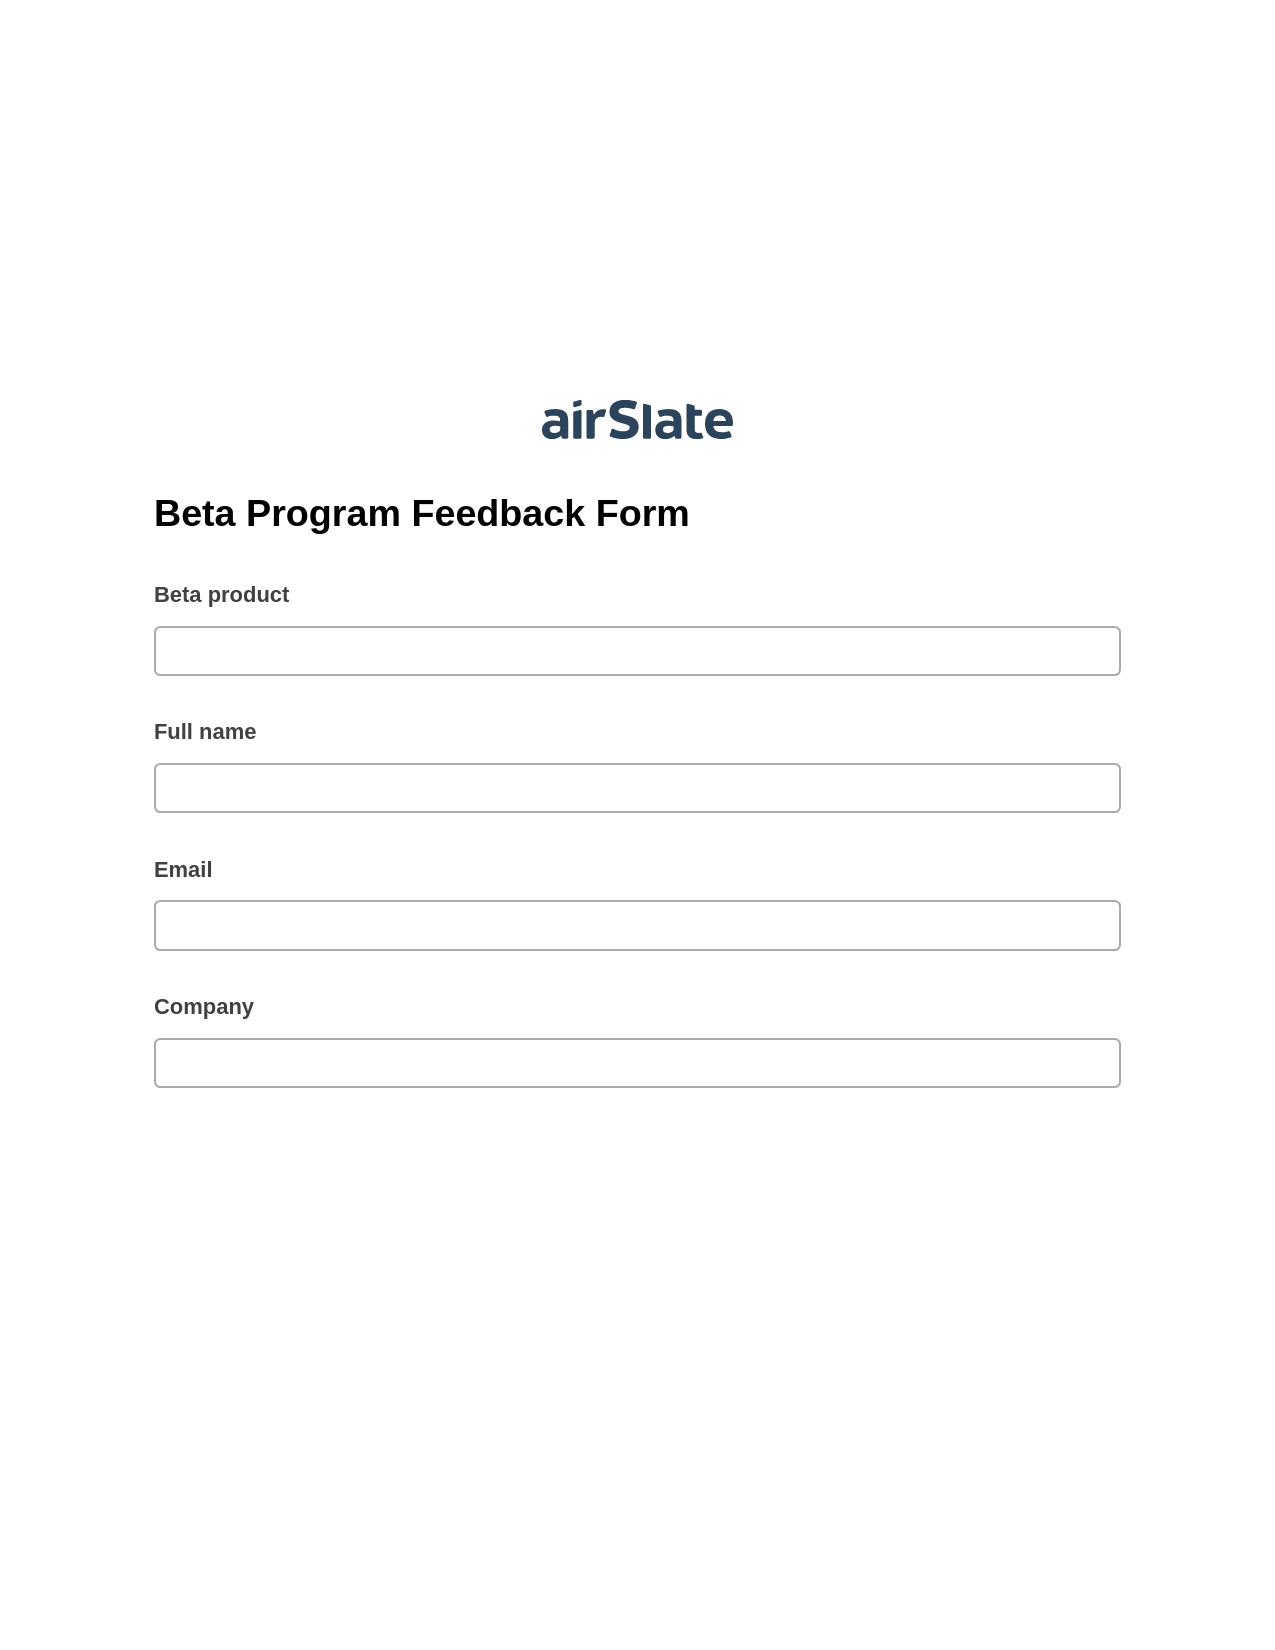 Beta Program Feedback Form Pre-fill Document Bot, Open as Role Bot, Export to Excel 365 Bot